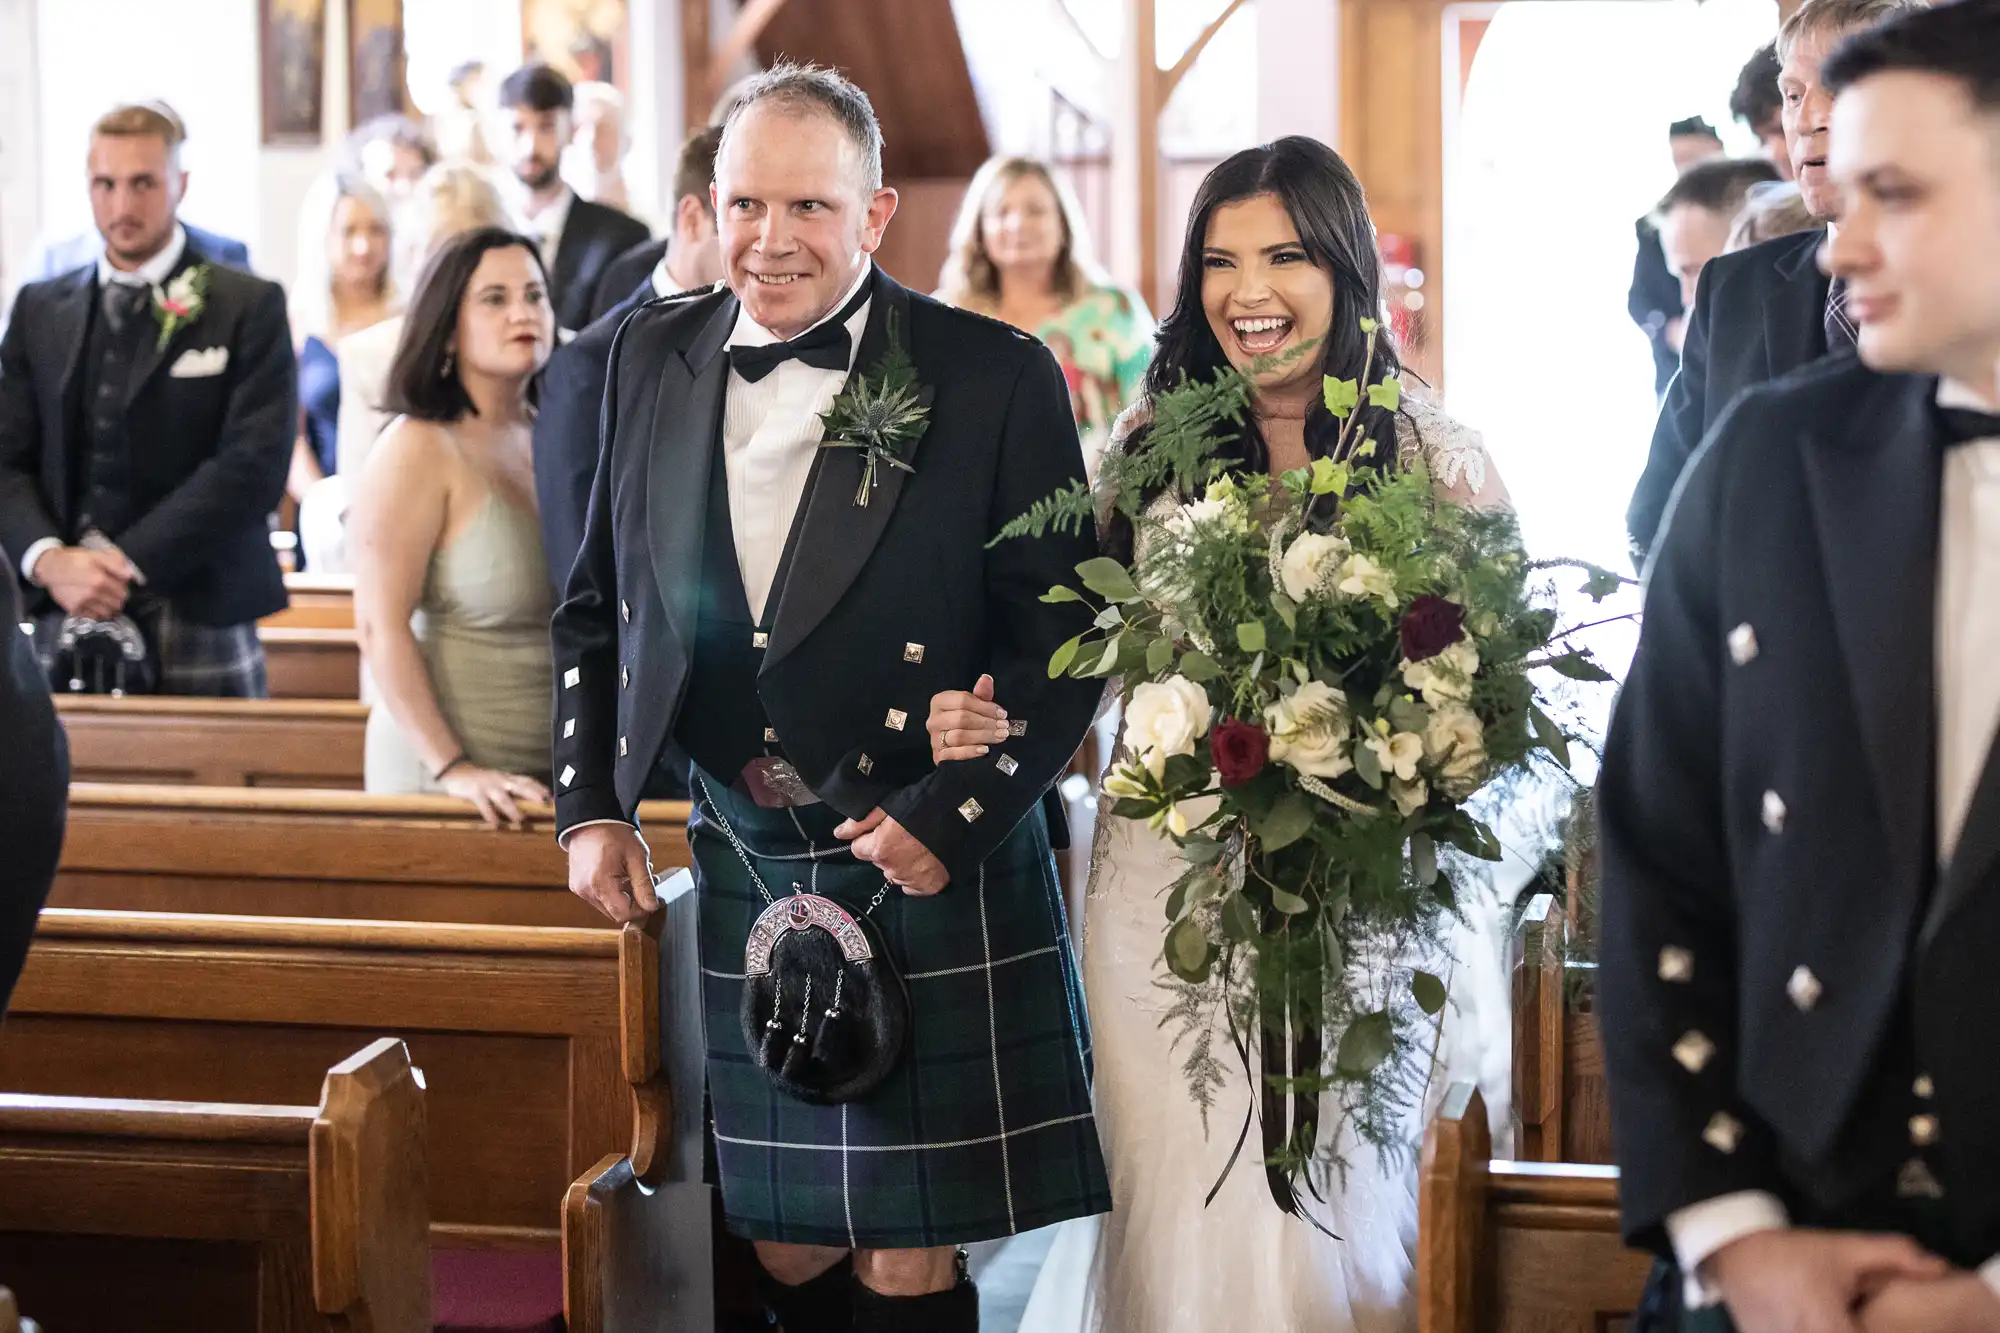 A bride and her father walking down the aisle in a church, both smiling, with the father wearing a traditional kilt and the bride holding a bouquet.